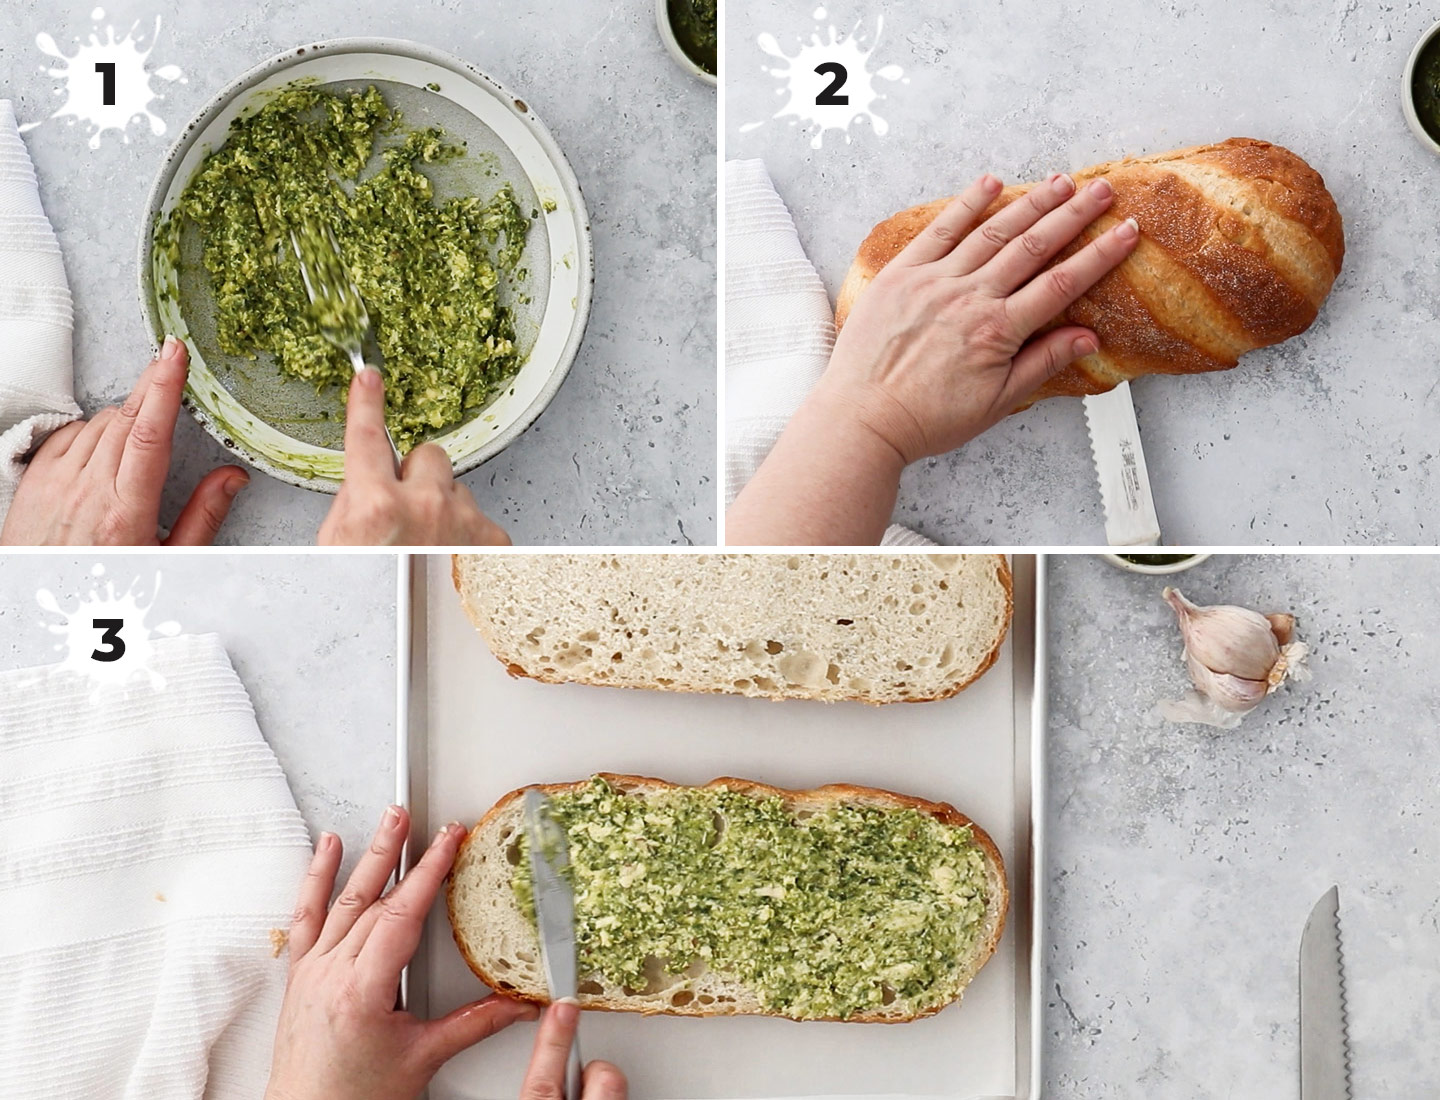 A collage of images showing how to make garlic bread.